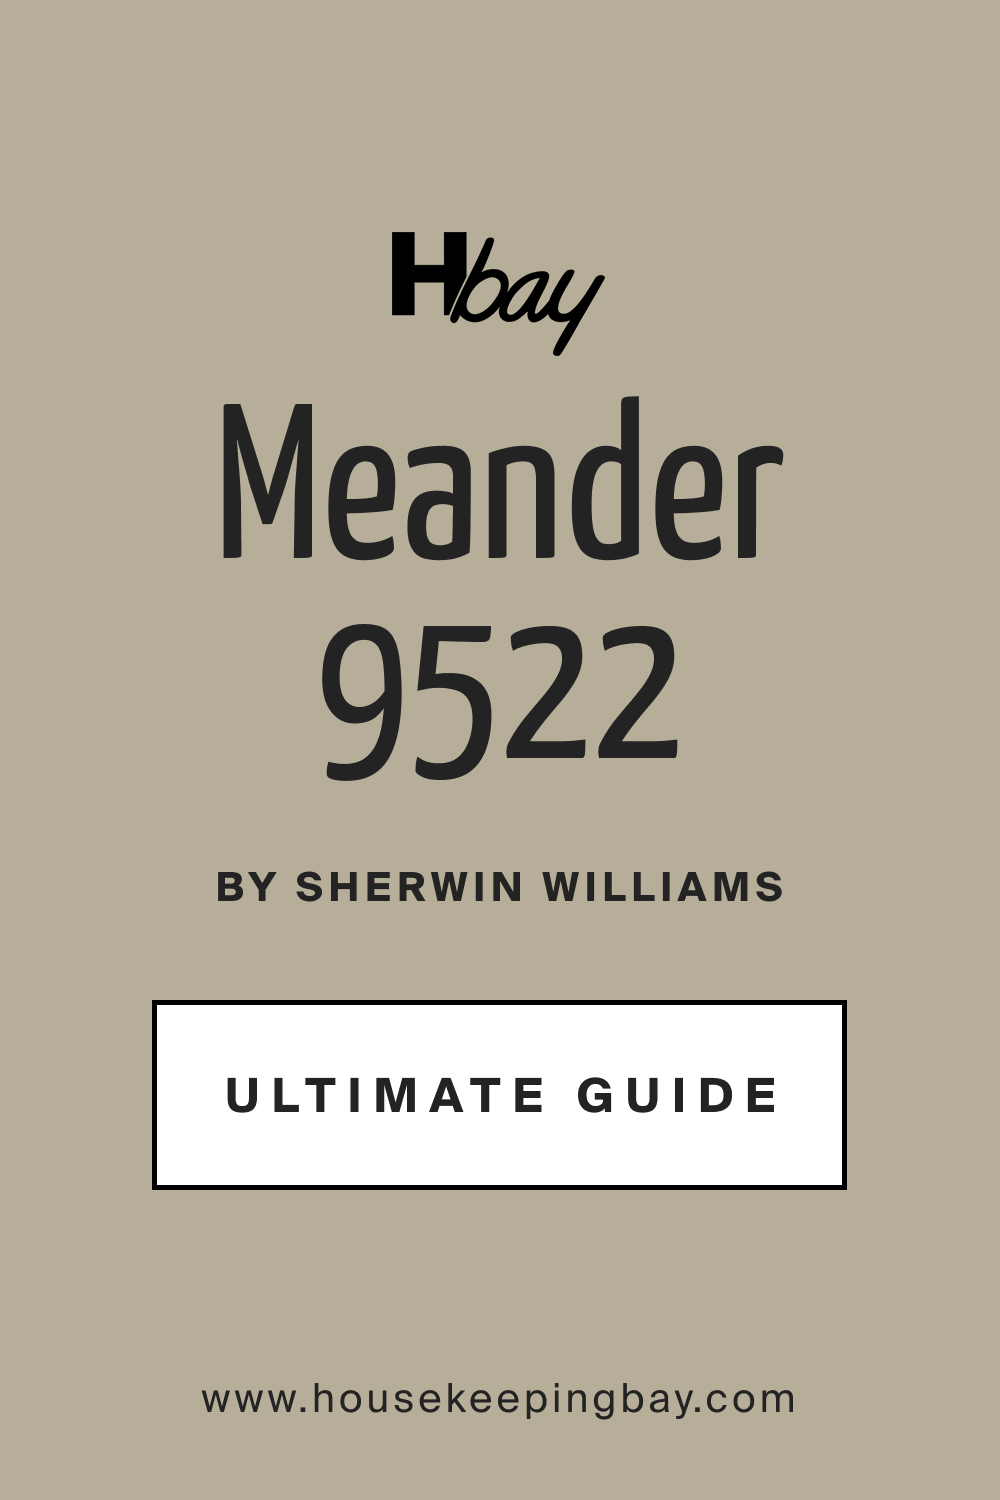 SW 9522 Meander by Sherwin Williams Ultimate Guide